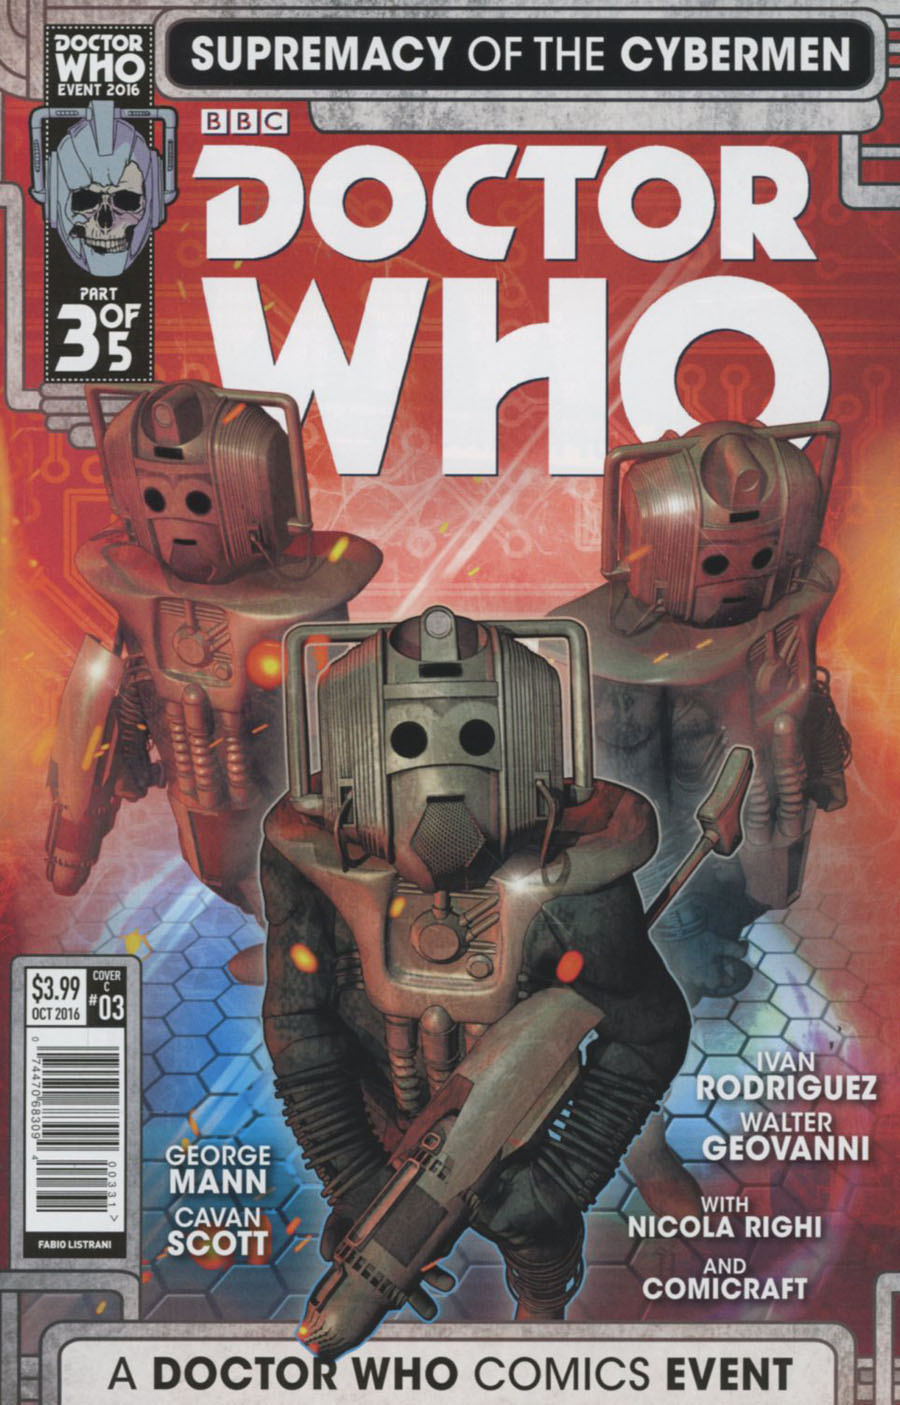 Doctor Who Event 2016 Supremacy Of The Cybermen #3 Cover C Variant Fabio Listrani Cover